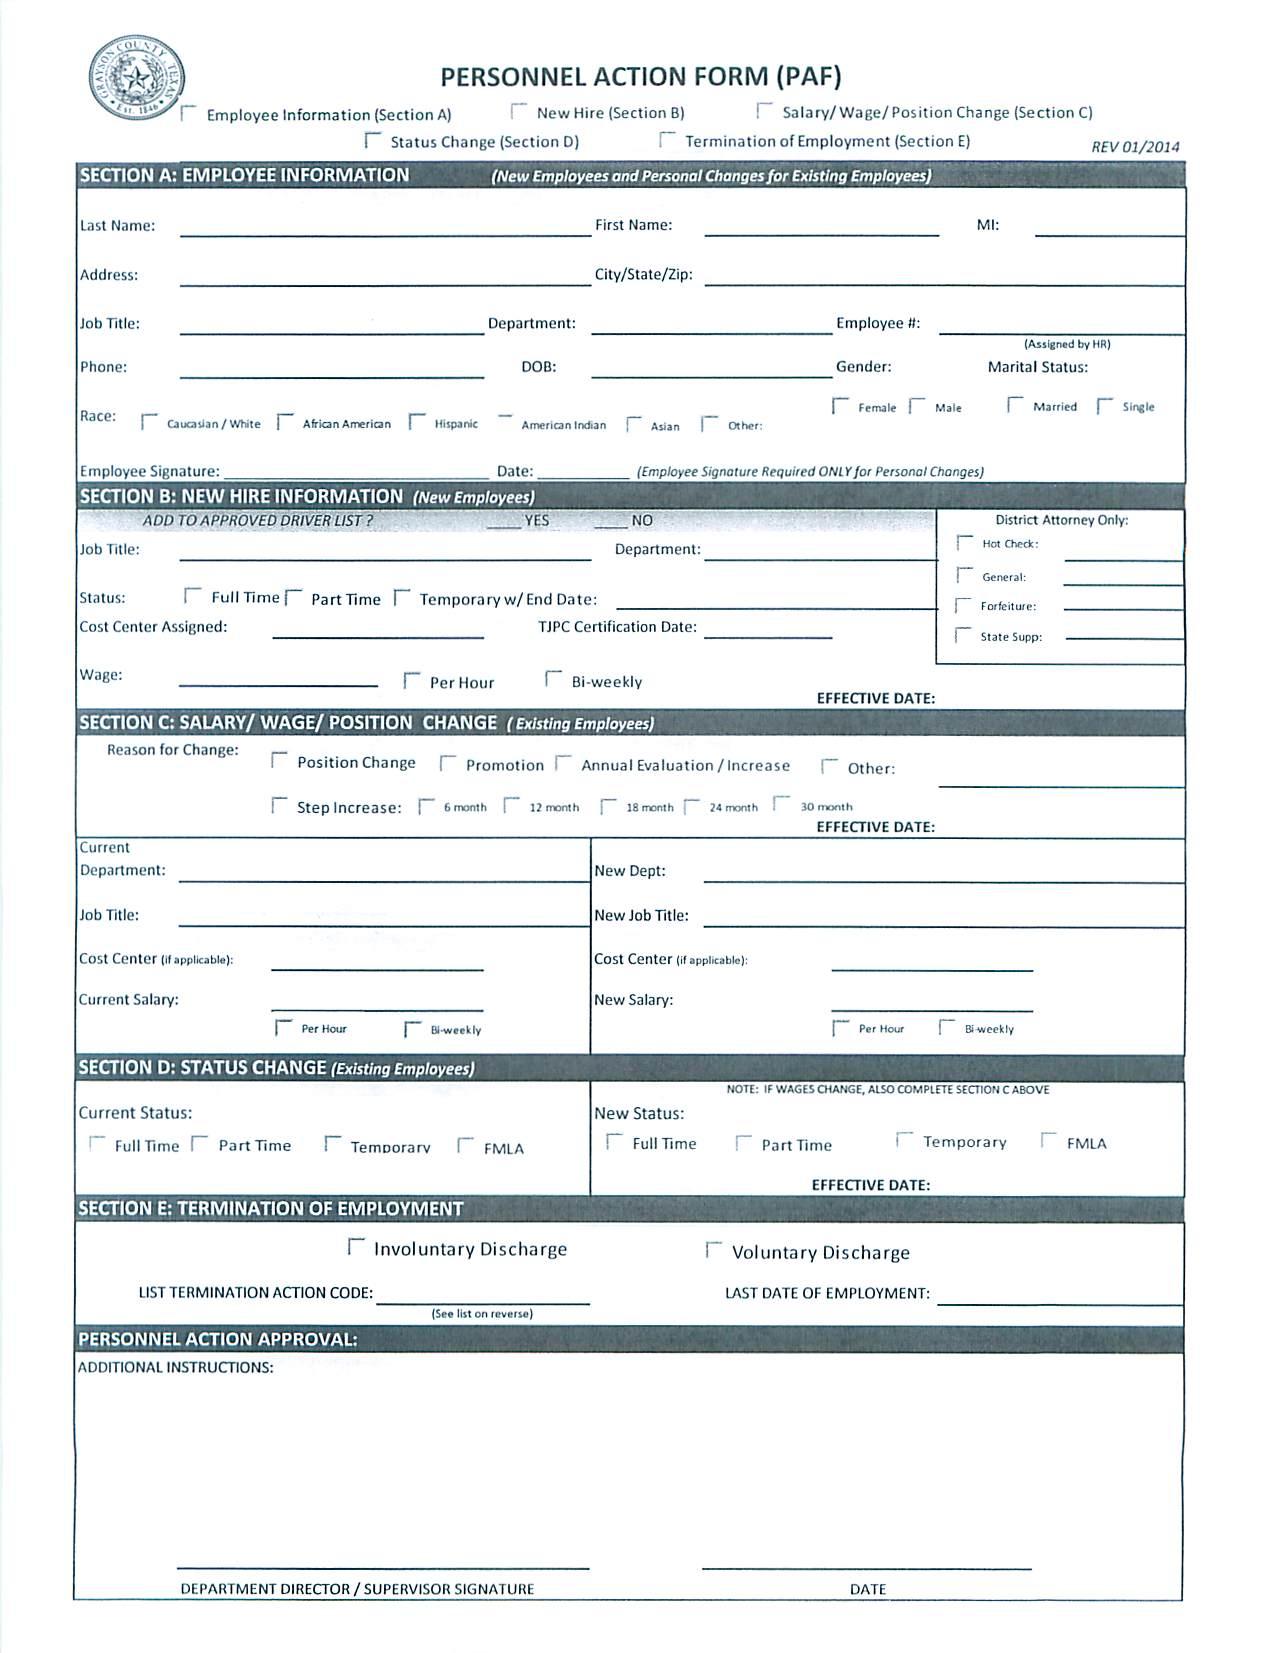 epaf employee personnel action form